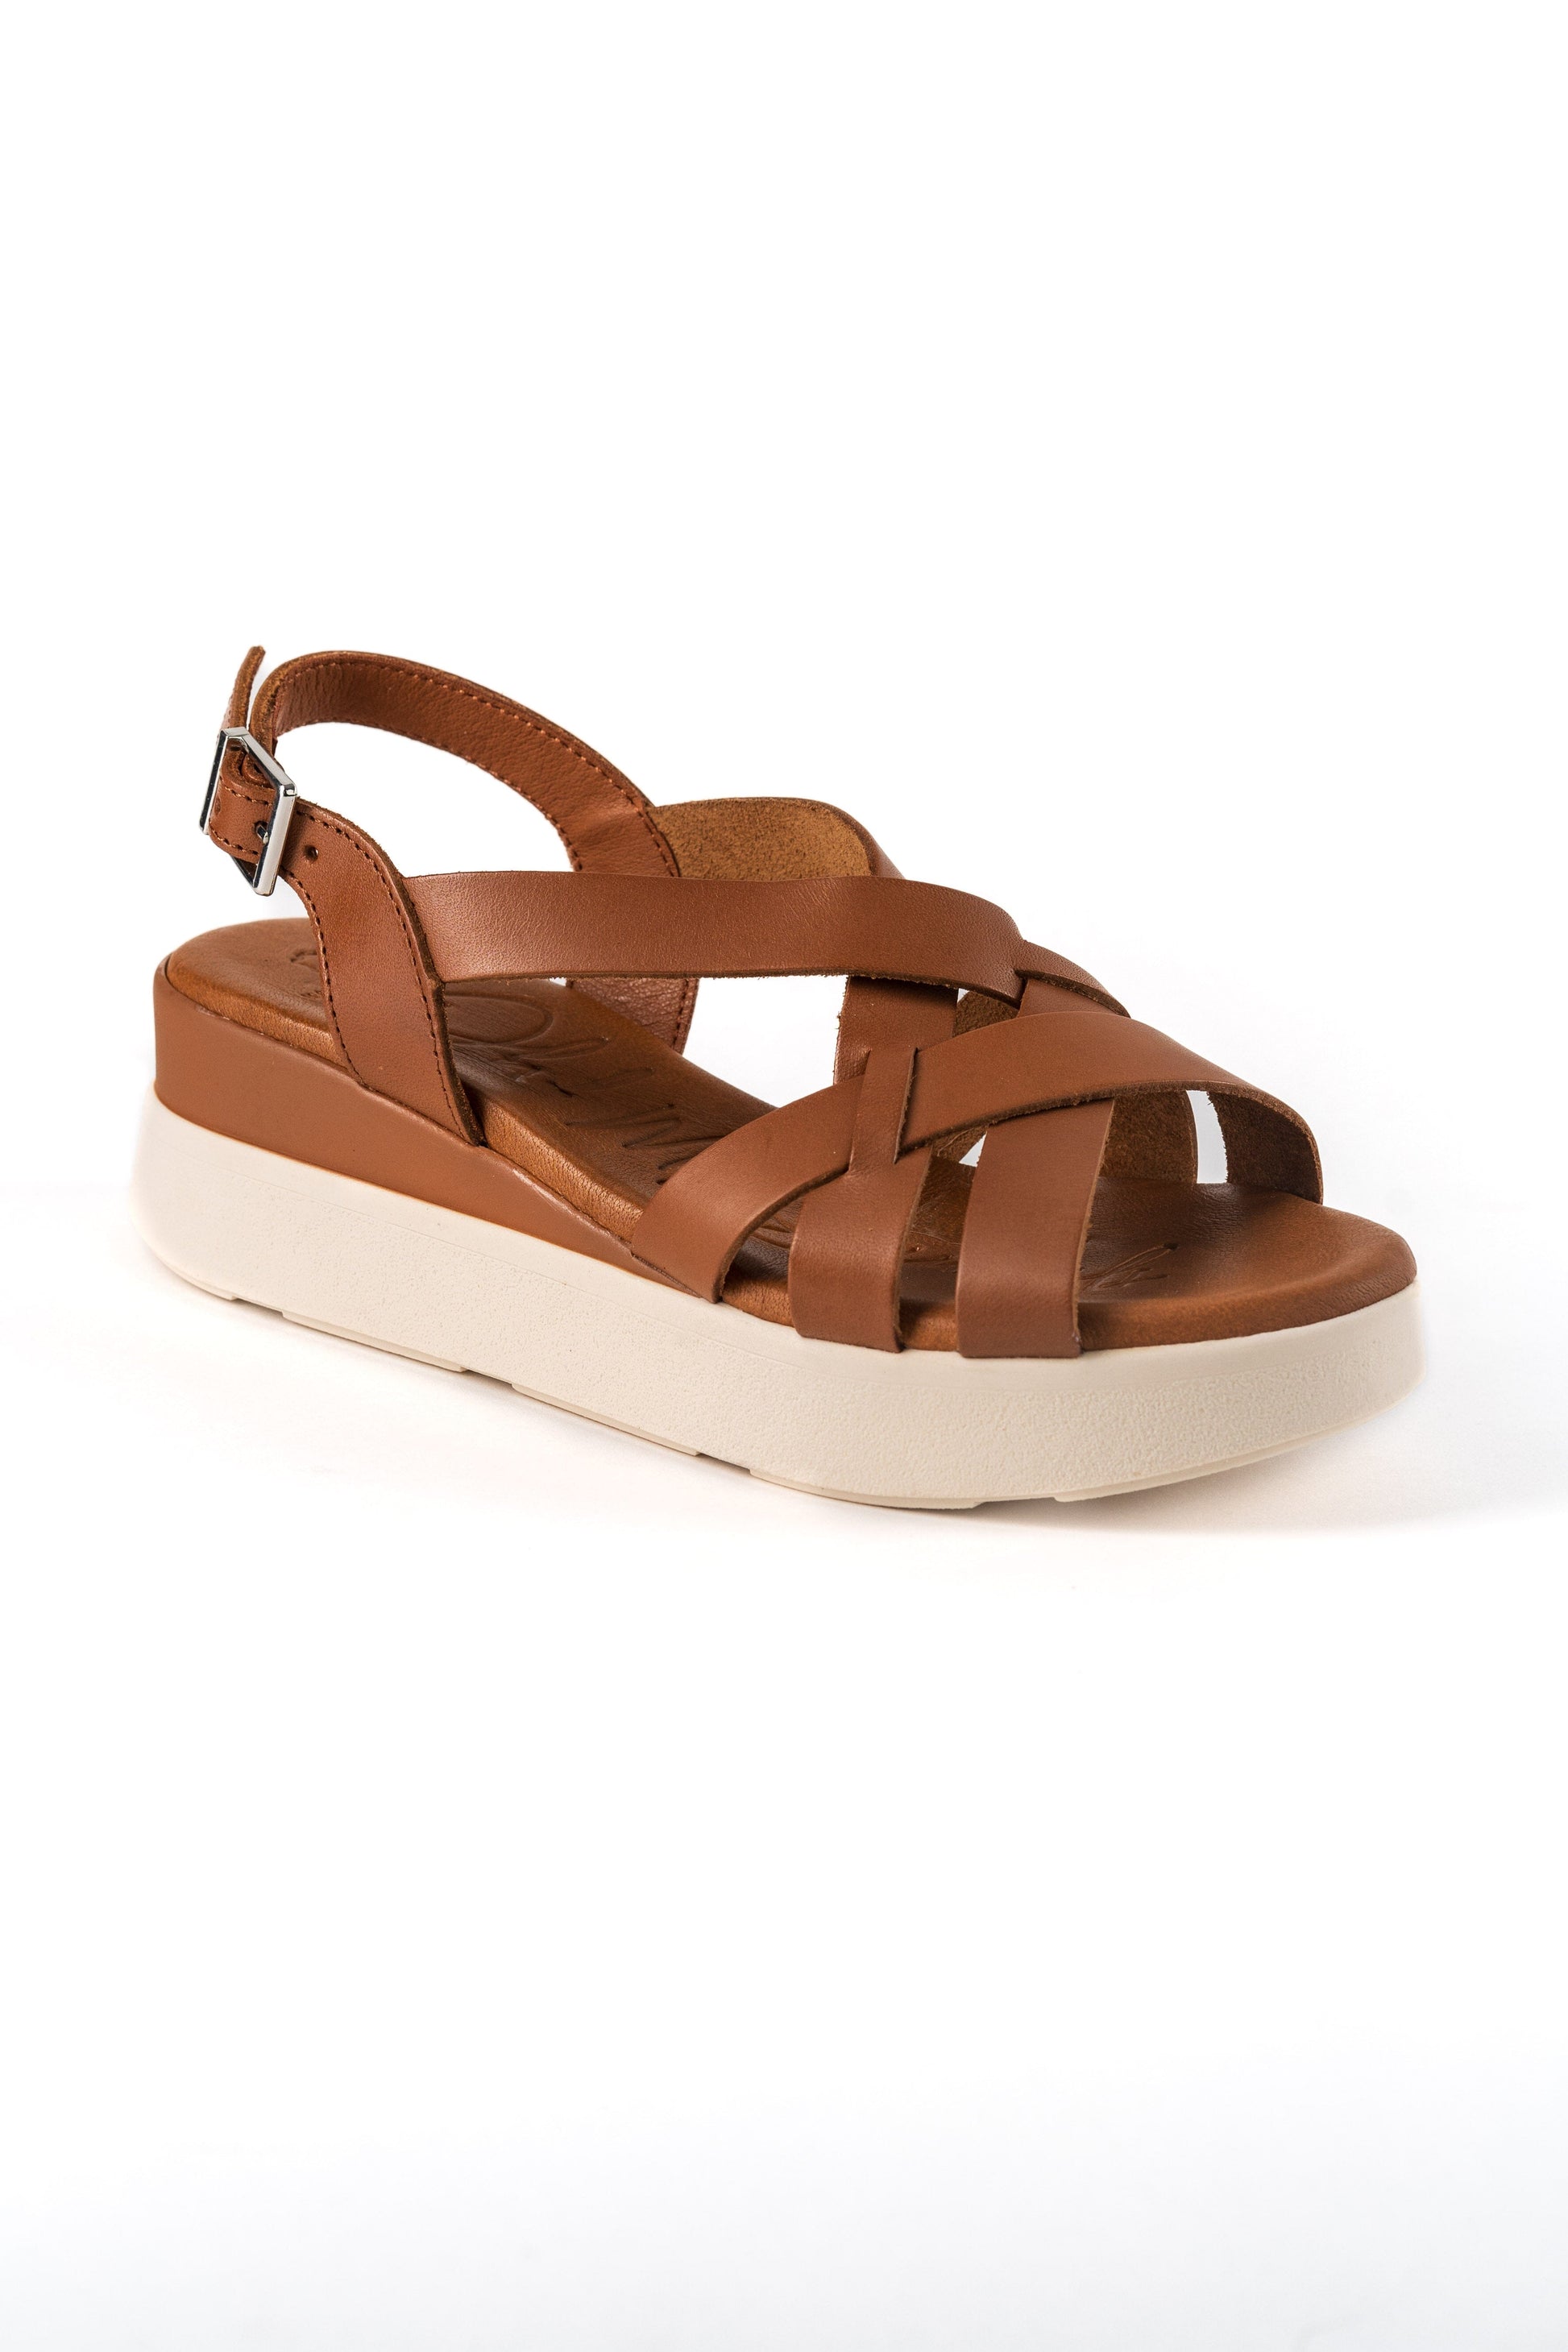 5188 Spanish leather crossed strappy sandals/wedge in Tan and Navy sandals Sam Star Shoes Tan 39/6 